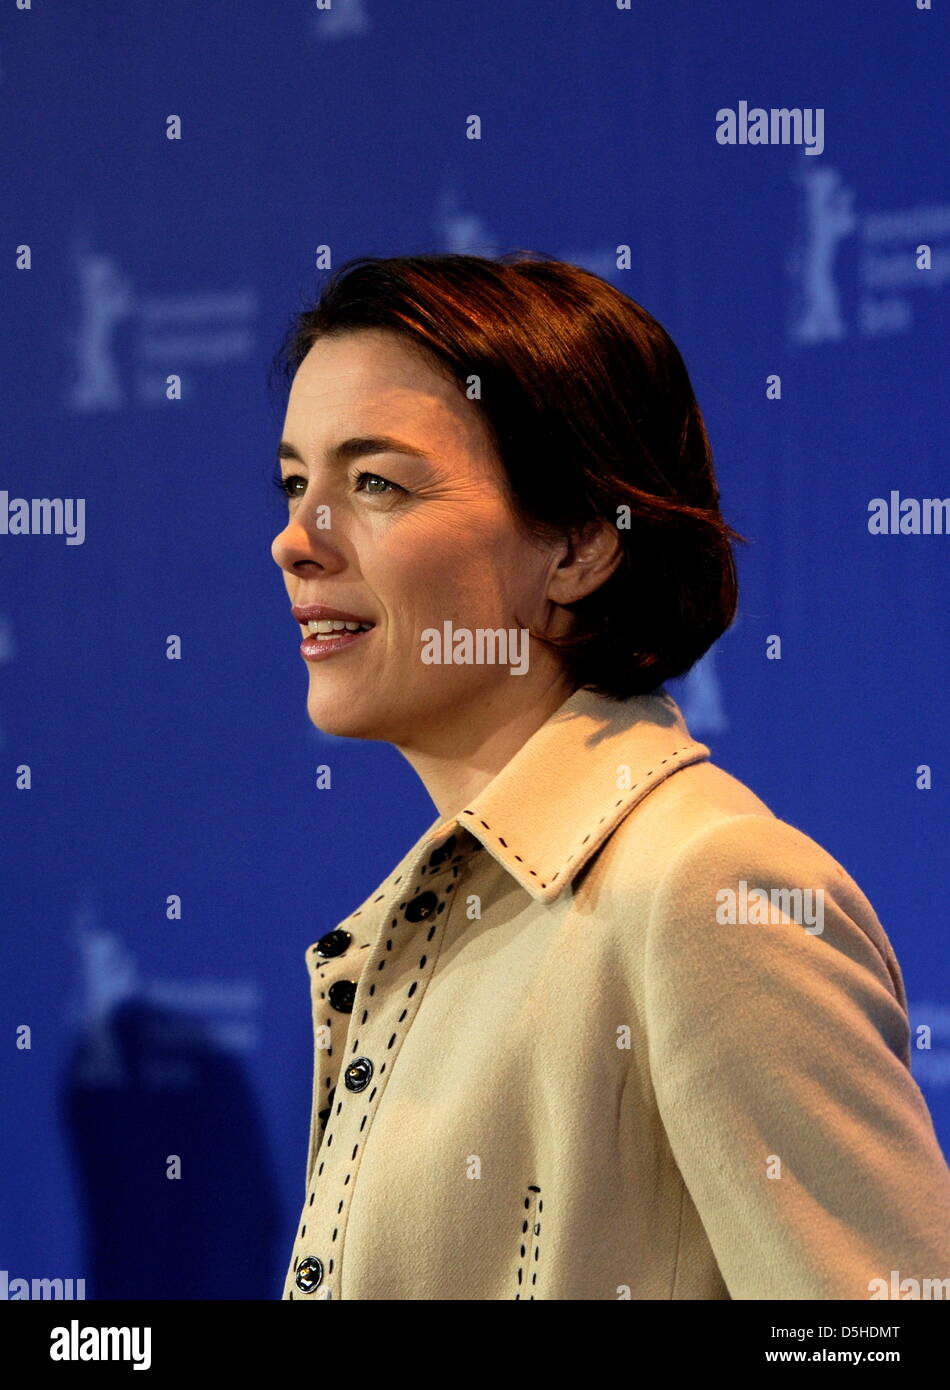 British actress Olivia Williams attends the photocall for the film 'The Ghost Writer' running in competion during the 60th Berlinale international film festival Friday, 12 February 2010 in Berlin. Photo: Marcus Brandt dpa/lbn Stock Photo